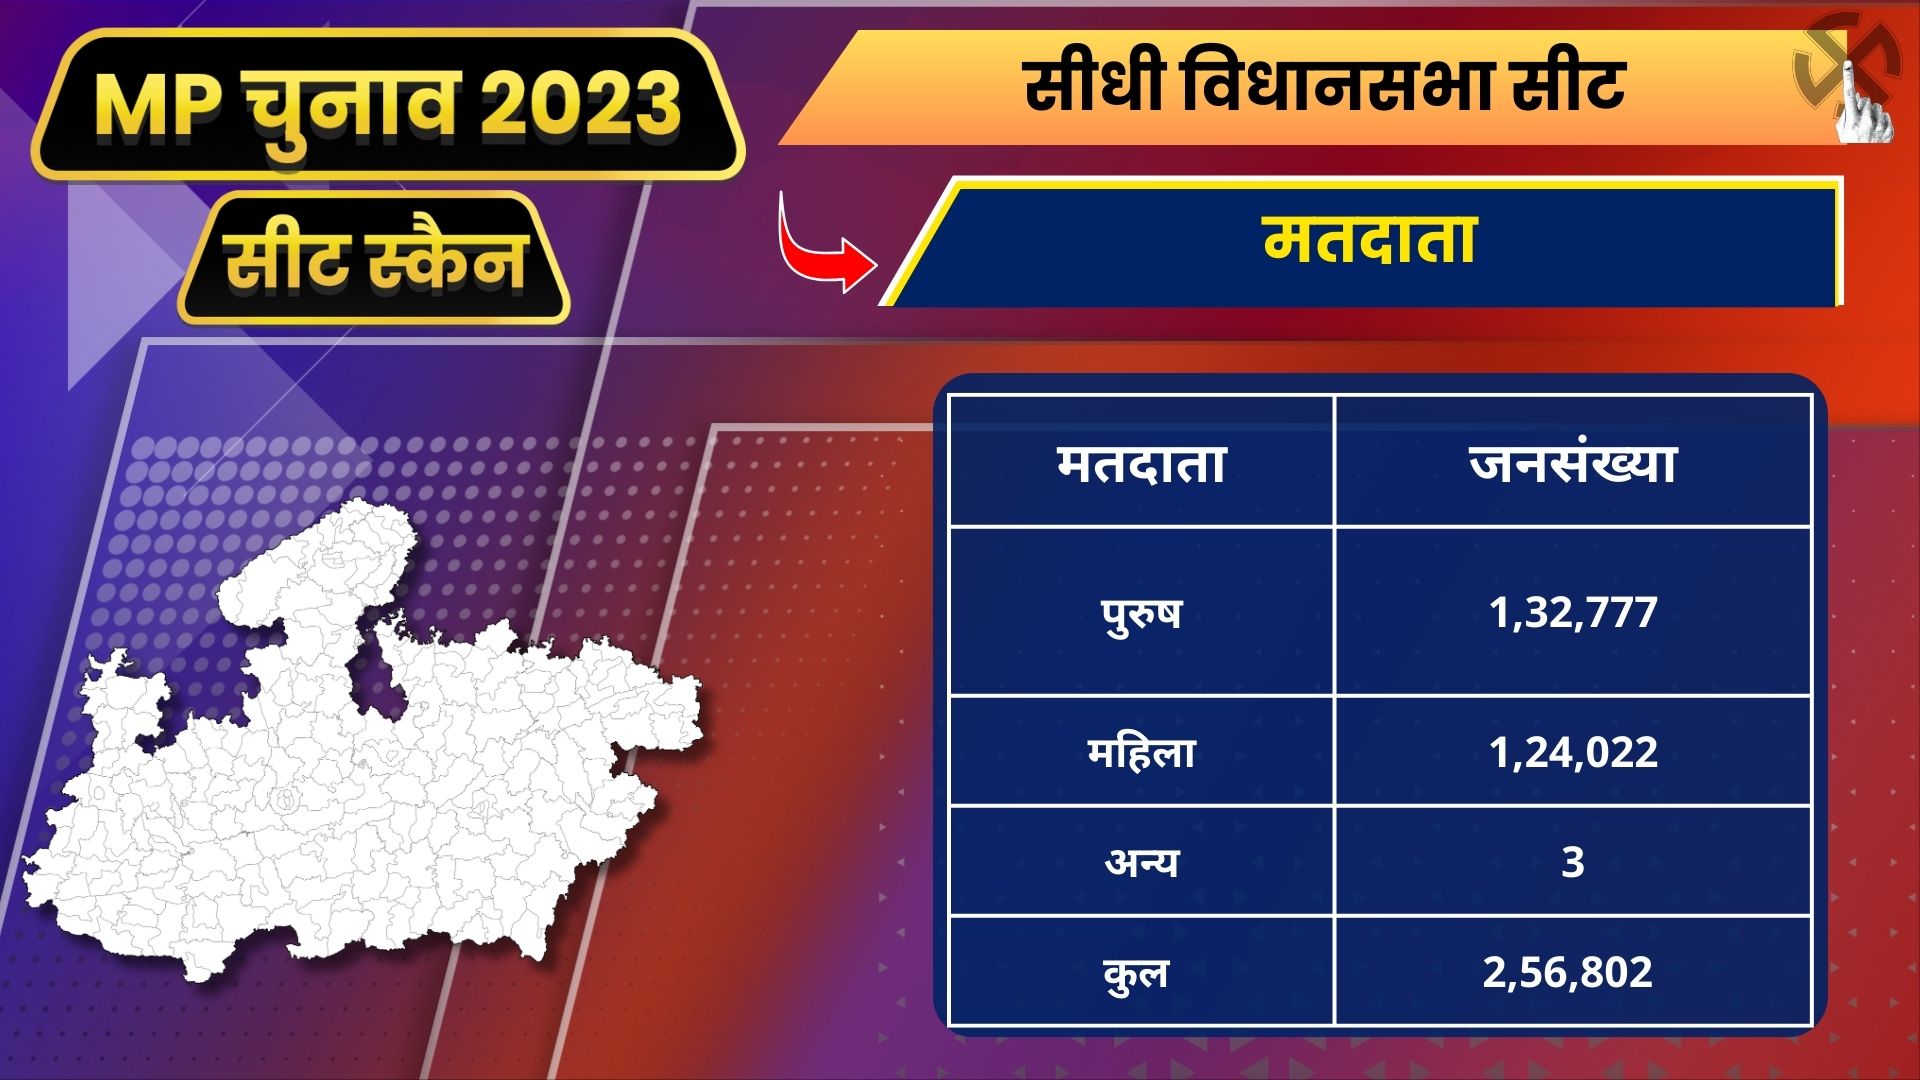 Number of voters in Sidhi